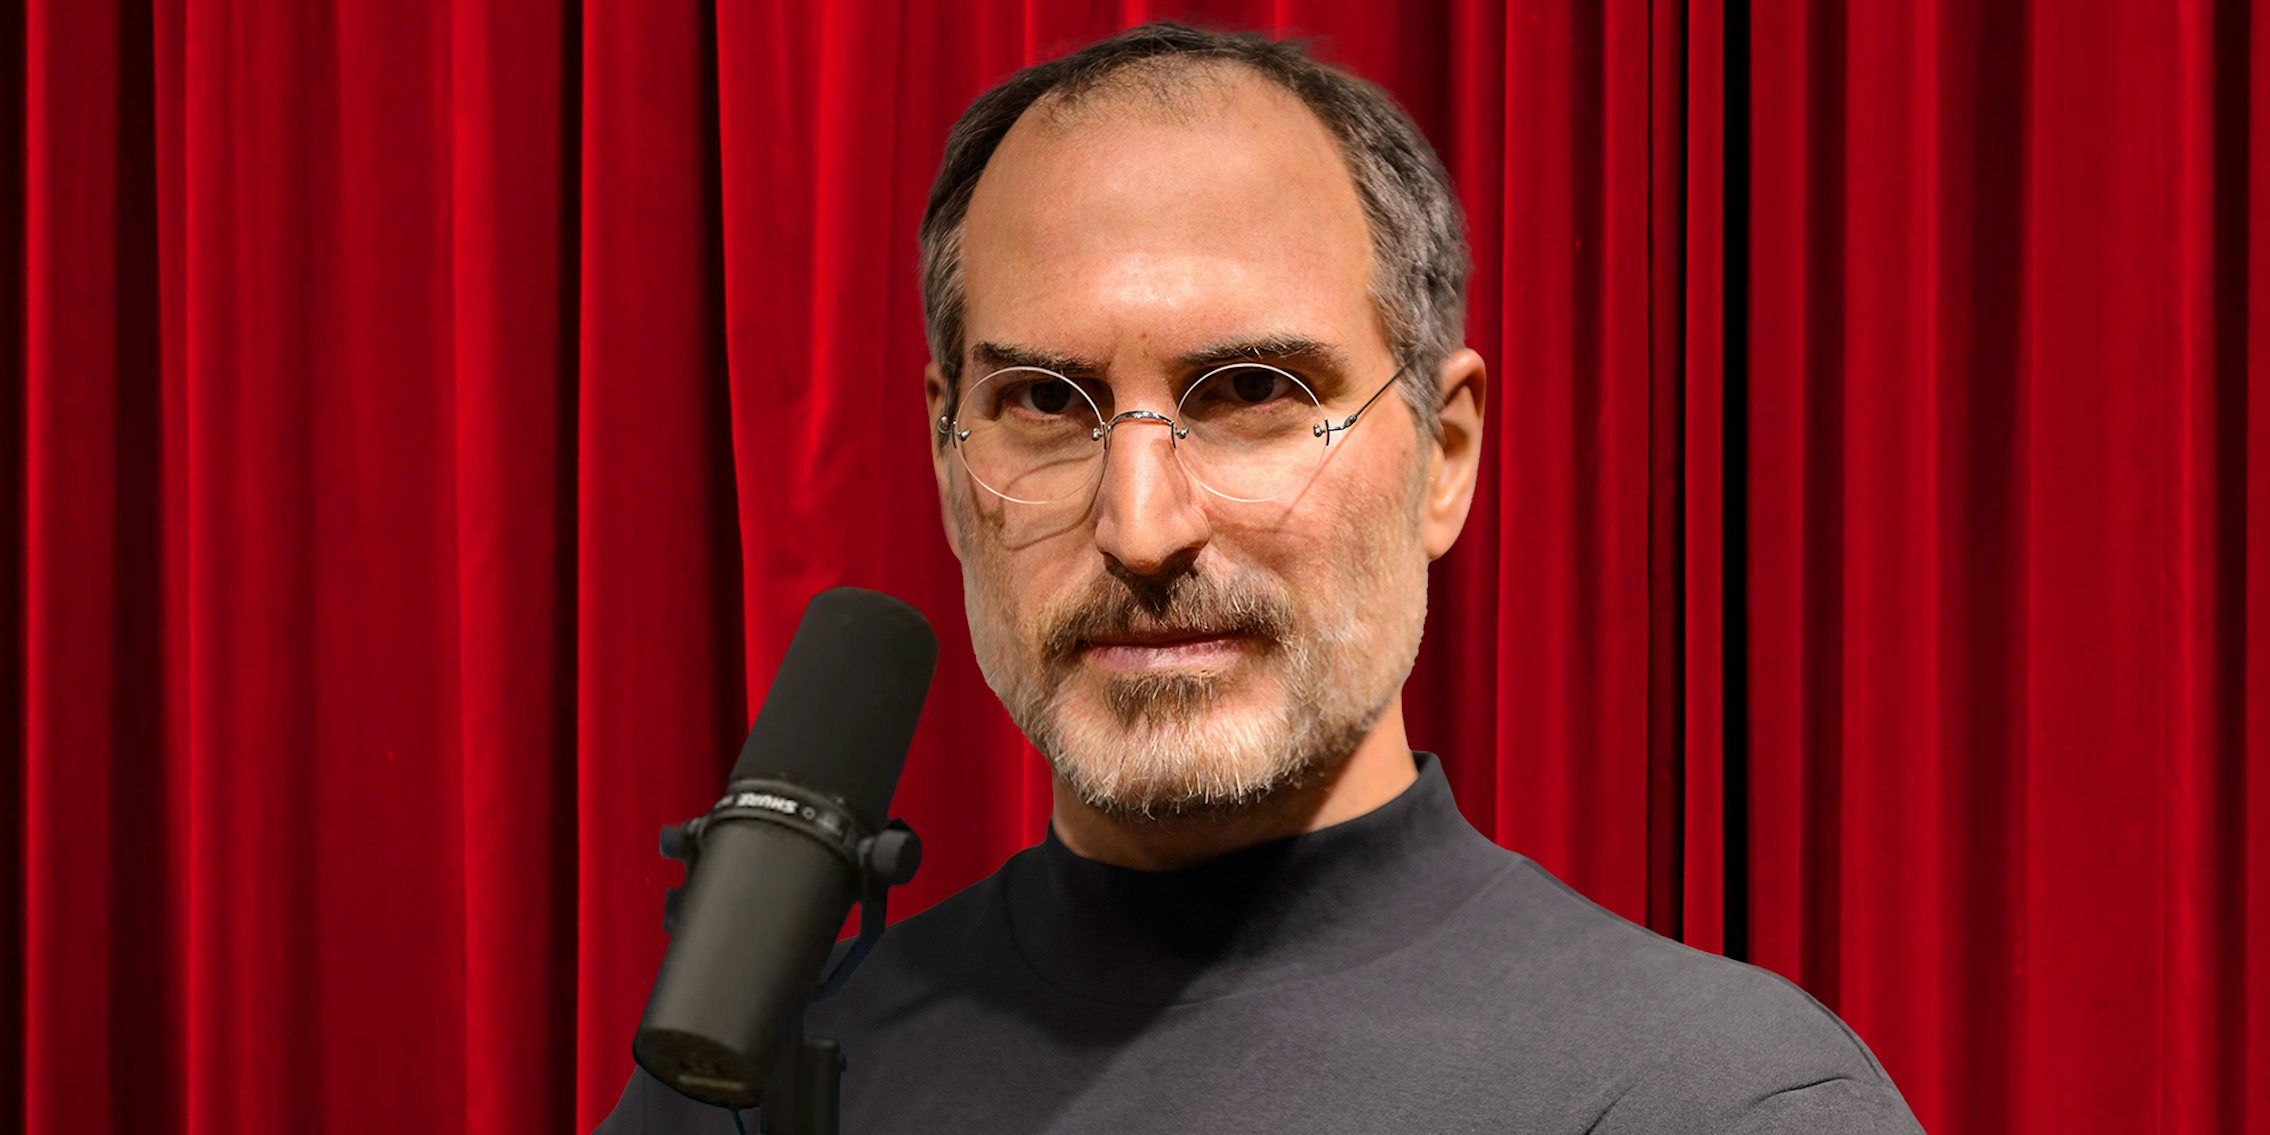 Steve Jobs wax statue with microphone and red curtain background